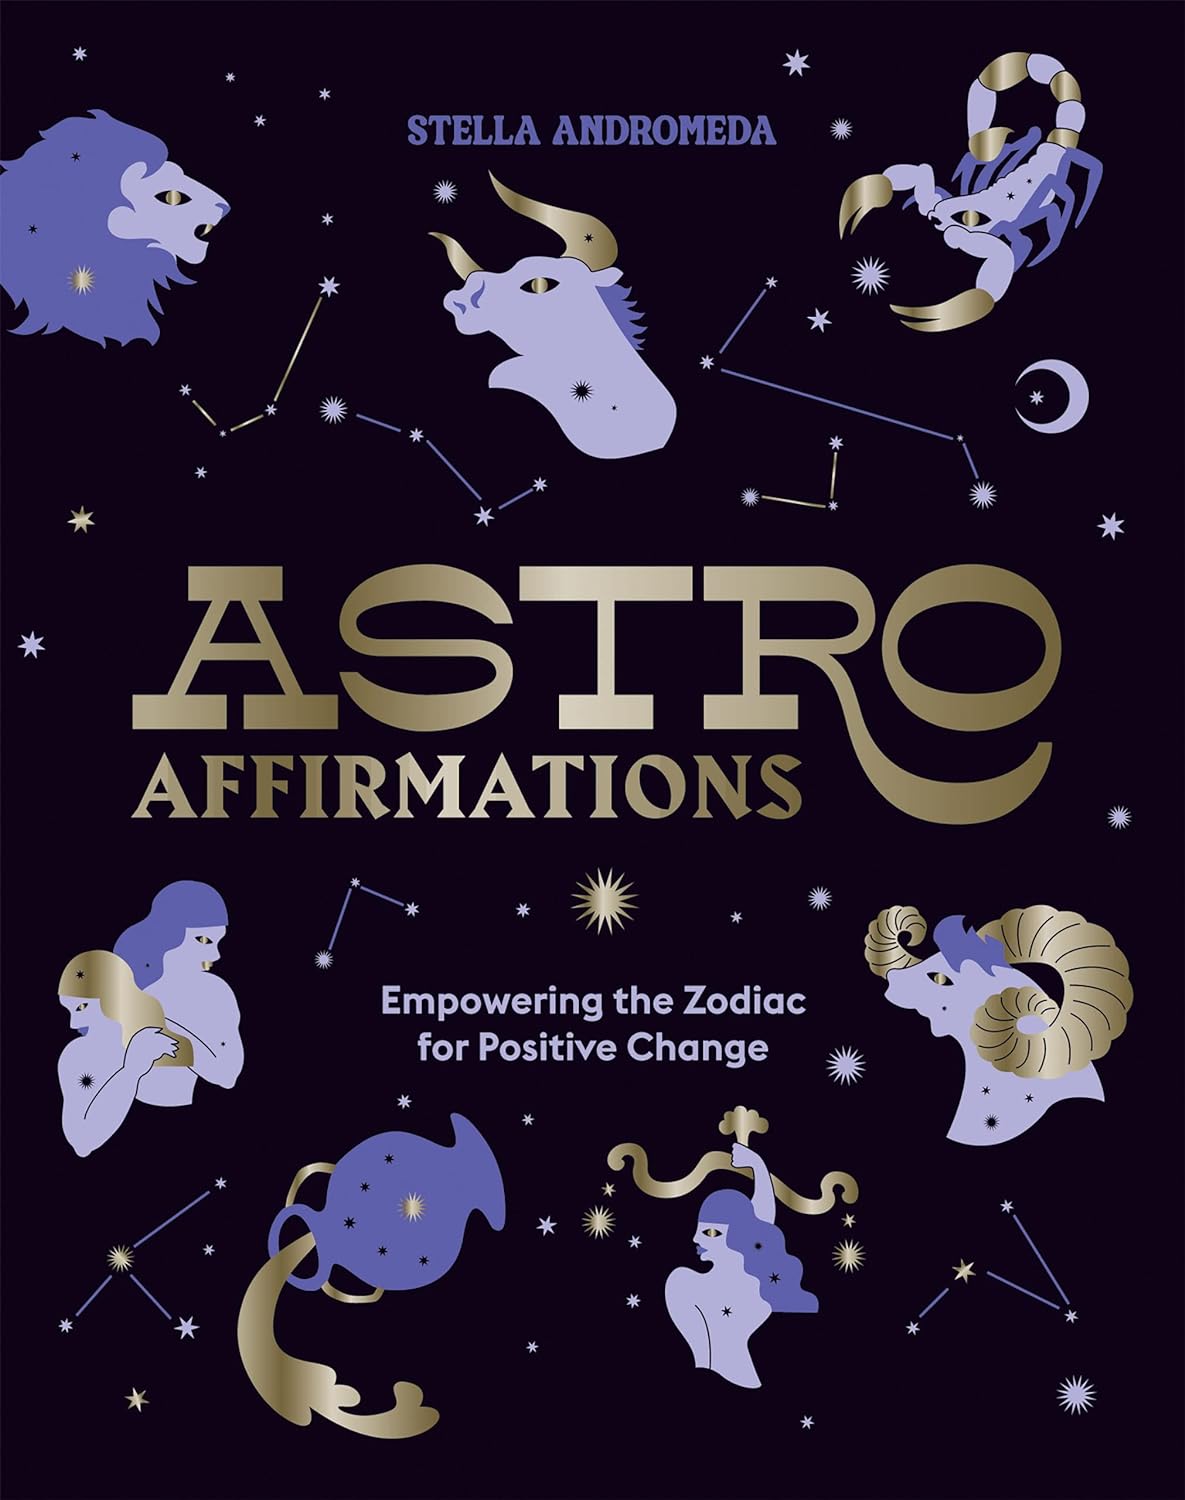 AstroAffirmation : Empowering the Zodiac for Positive Change